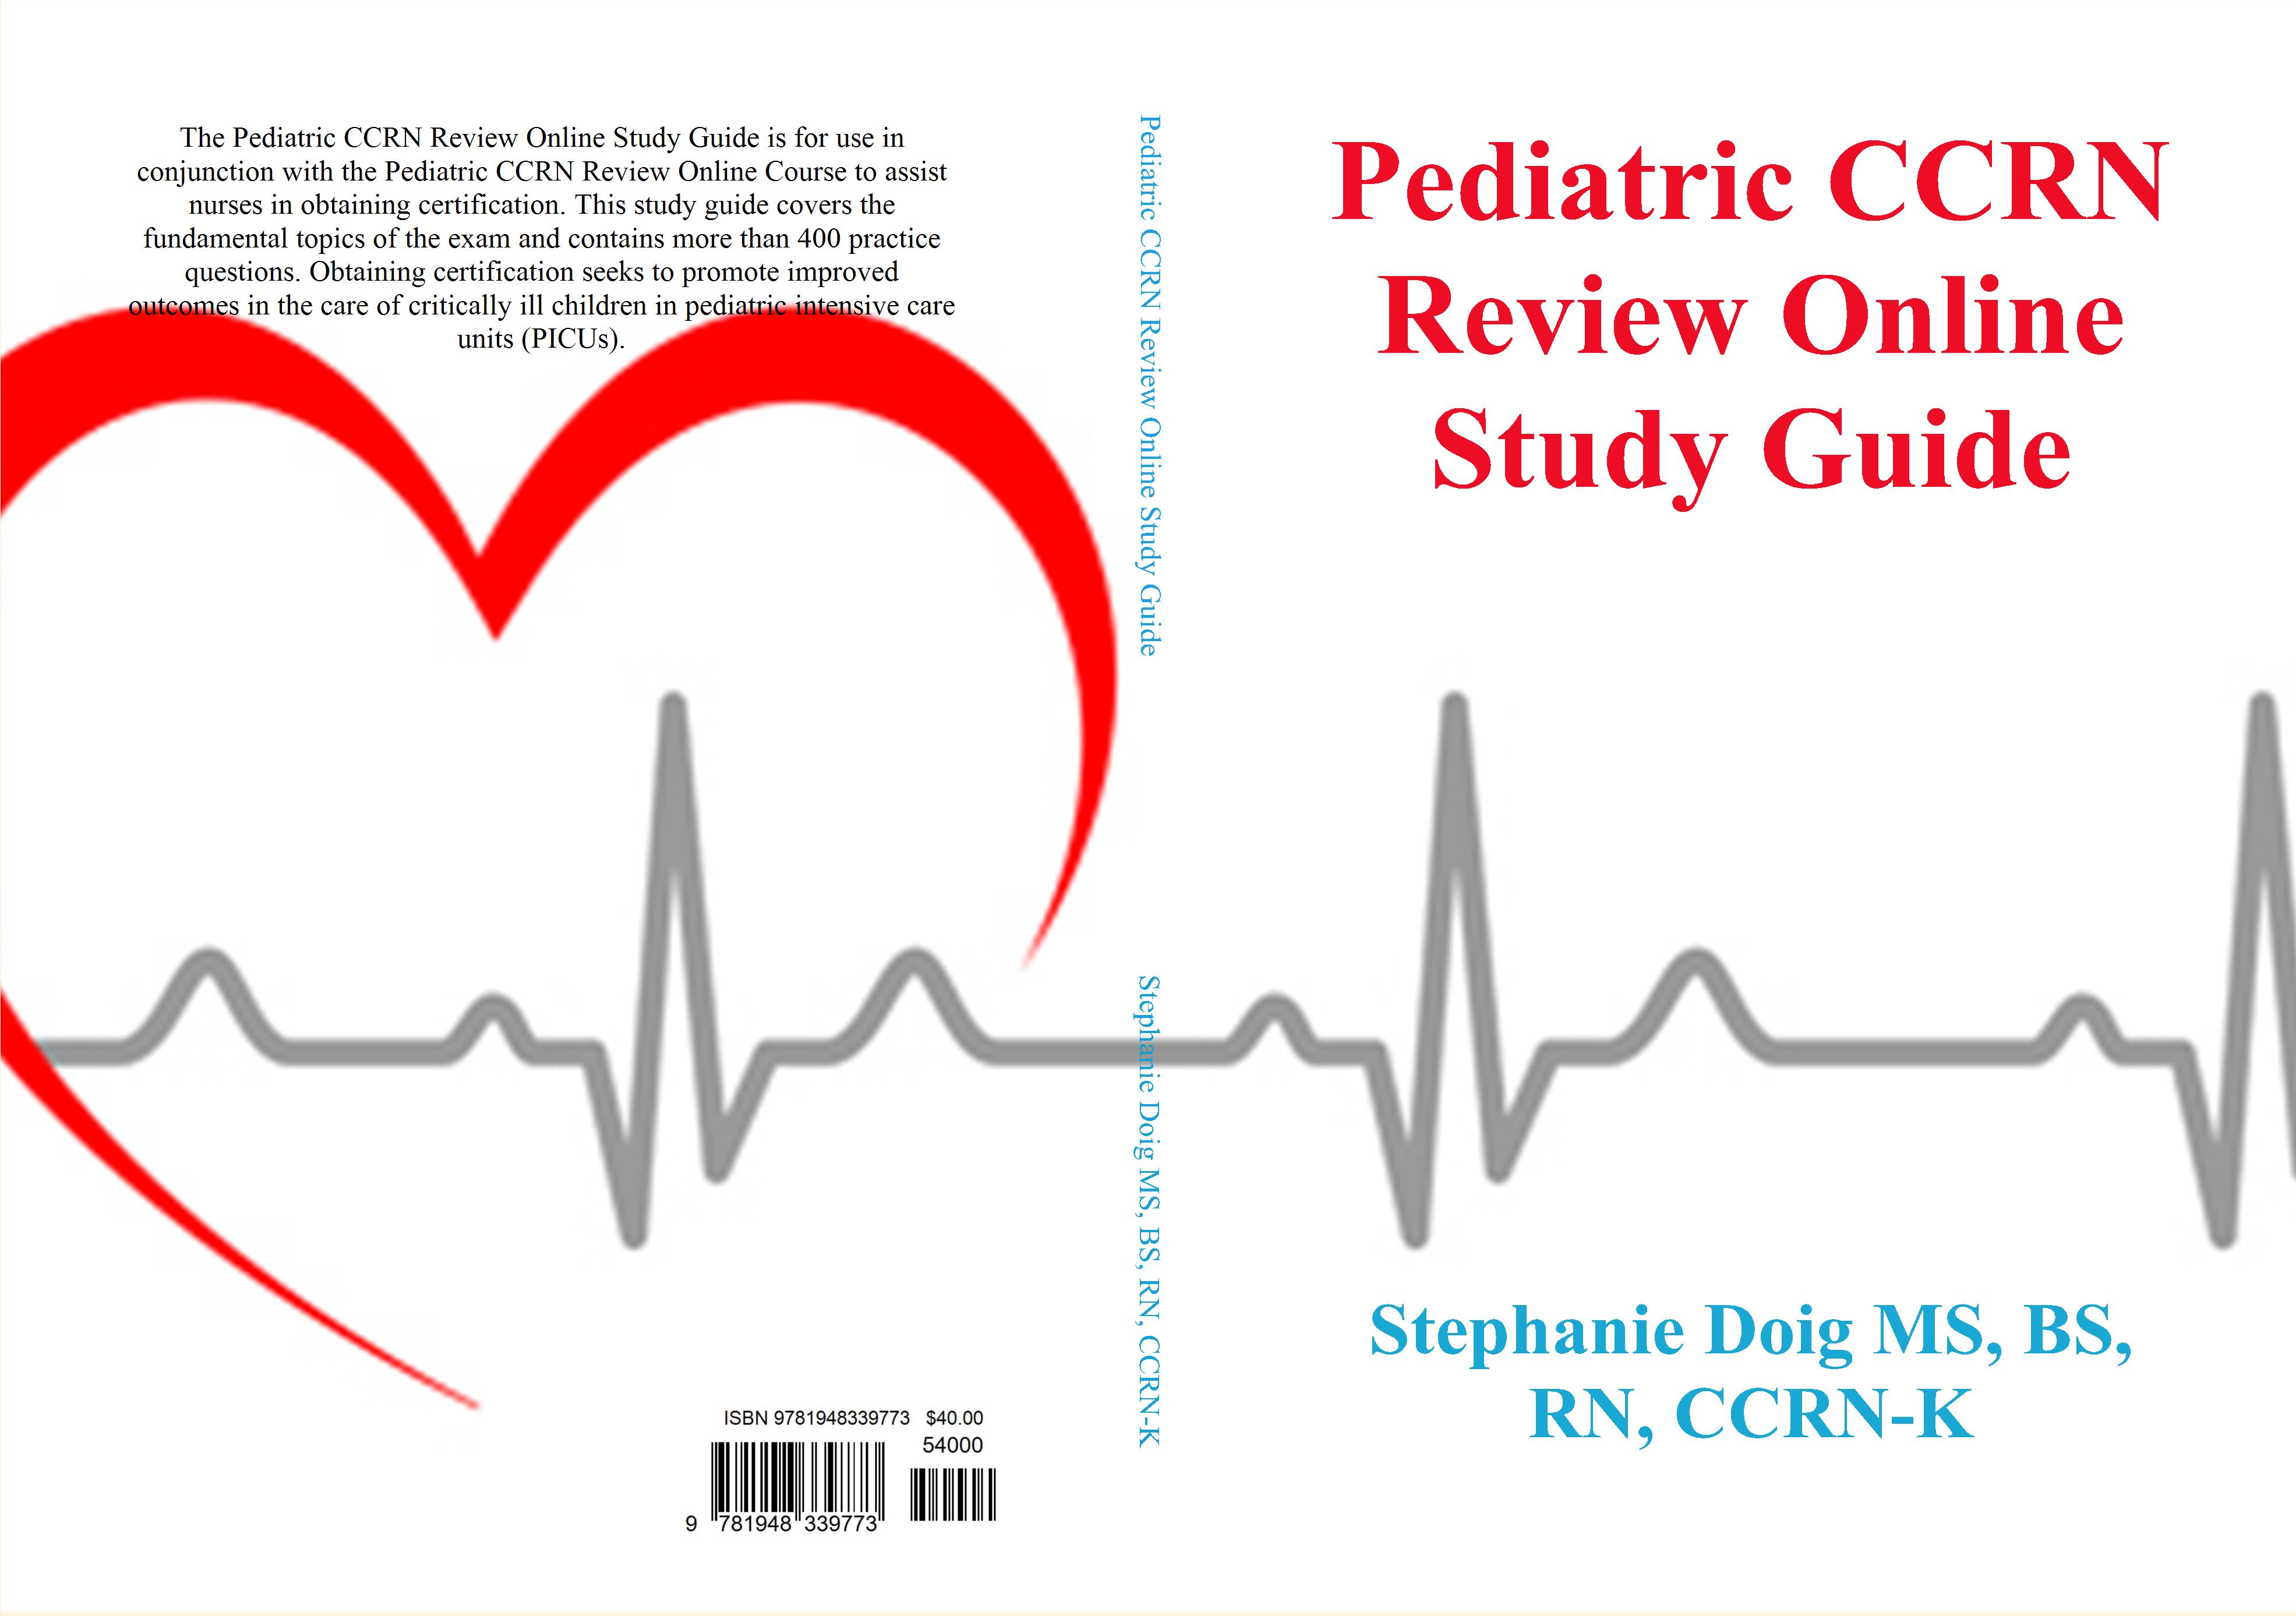 New CCRN-Pediatric Test Objectives